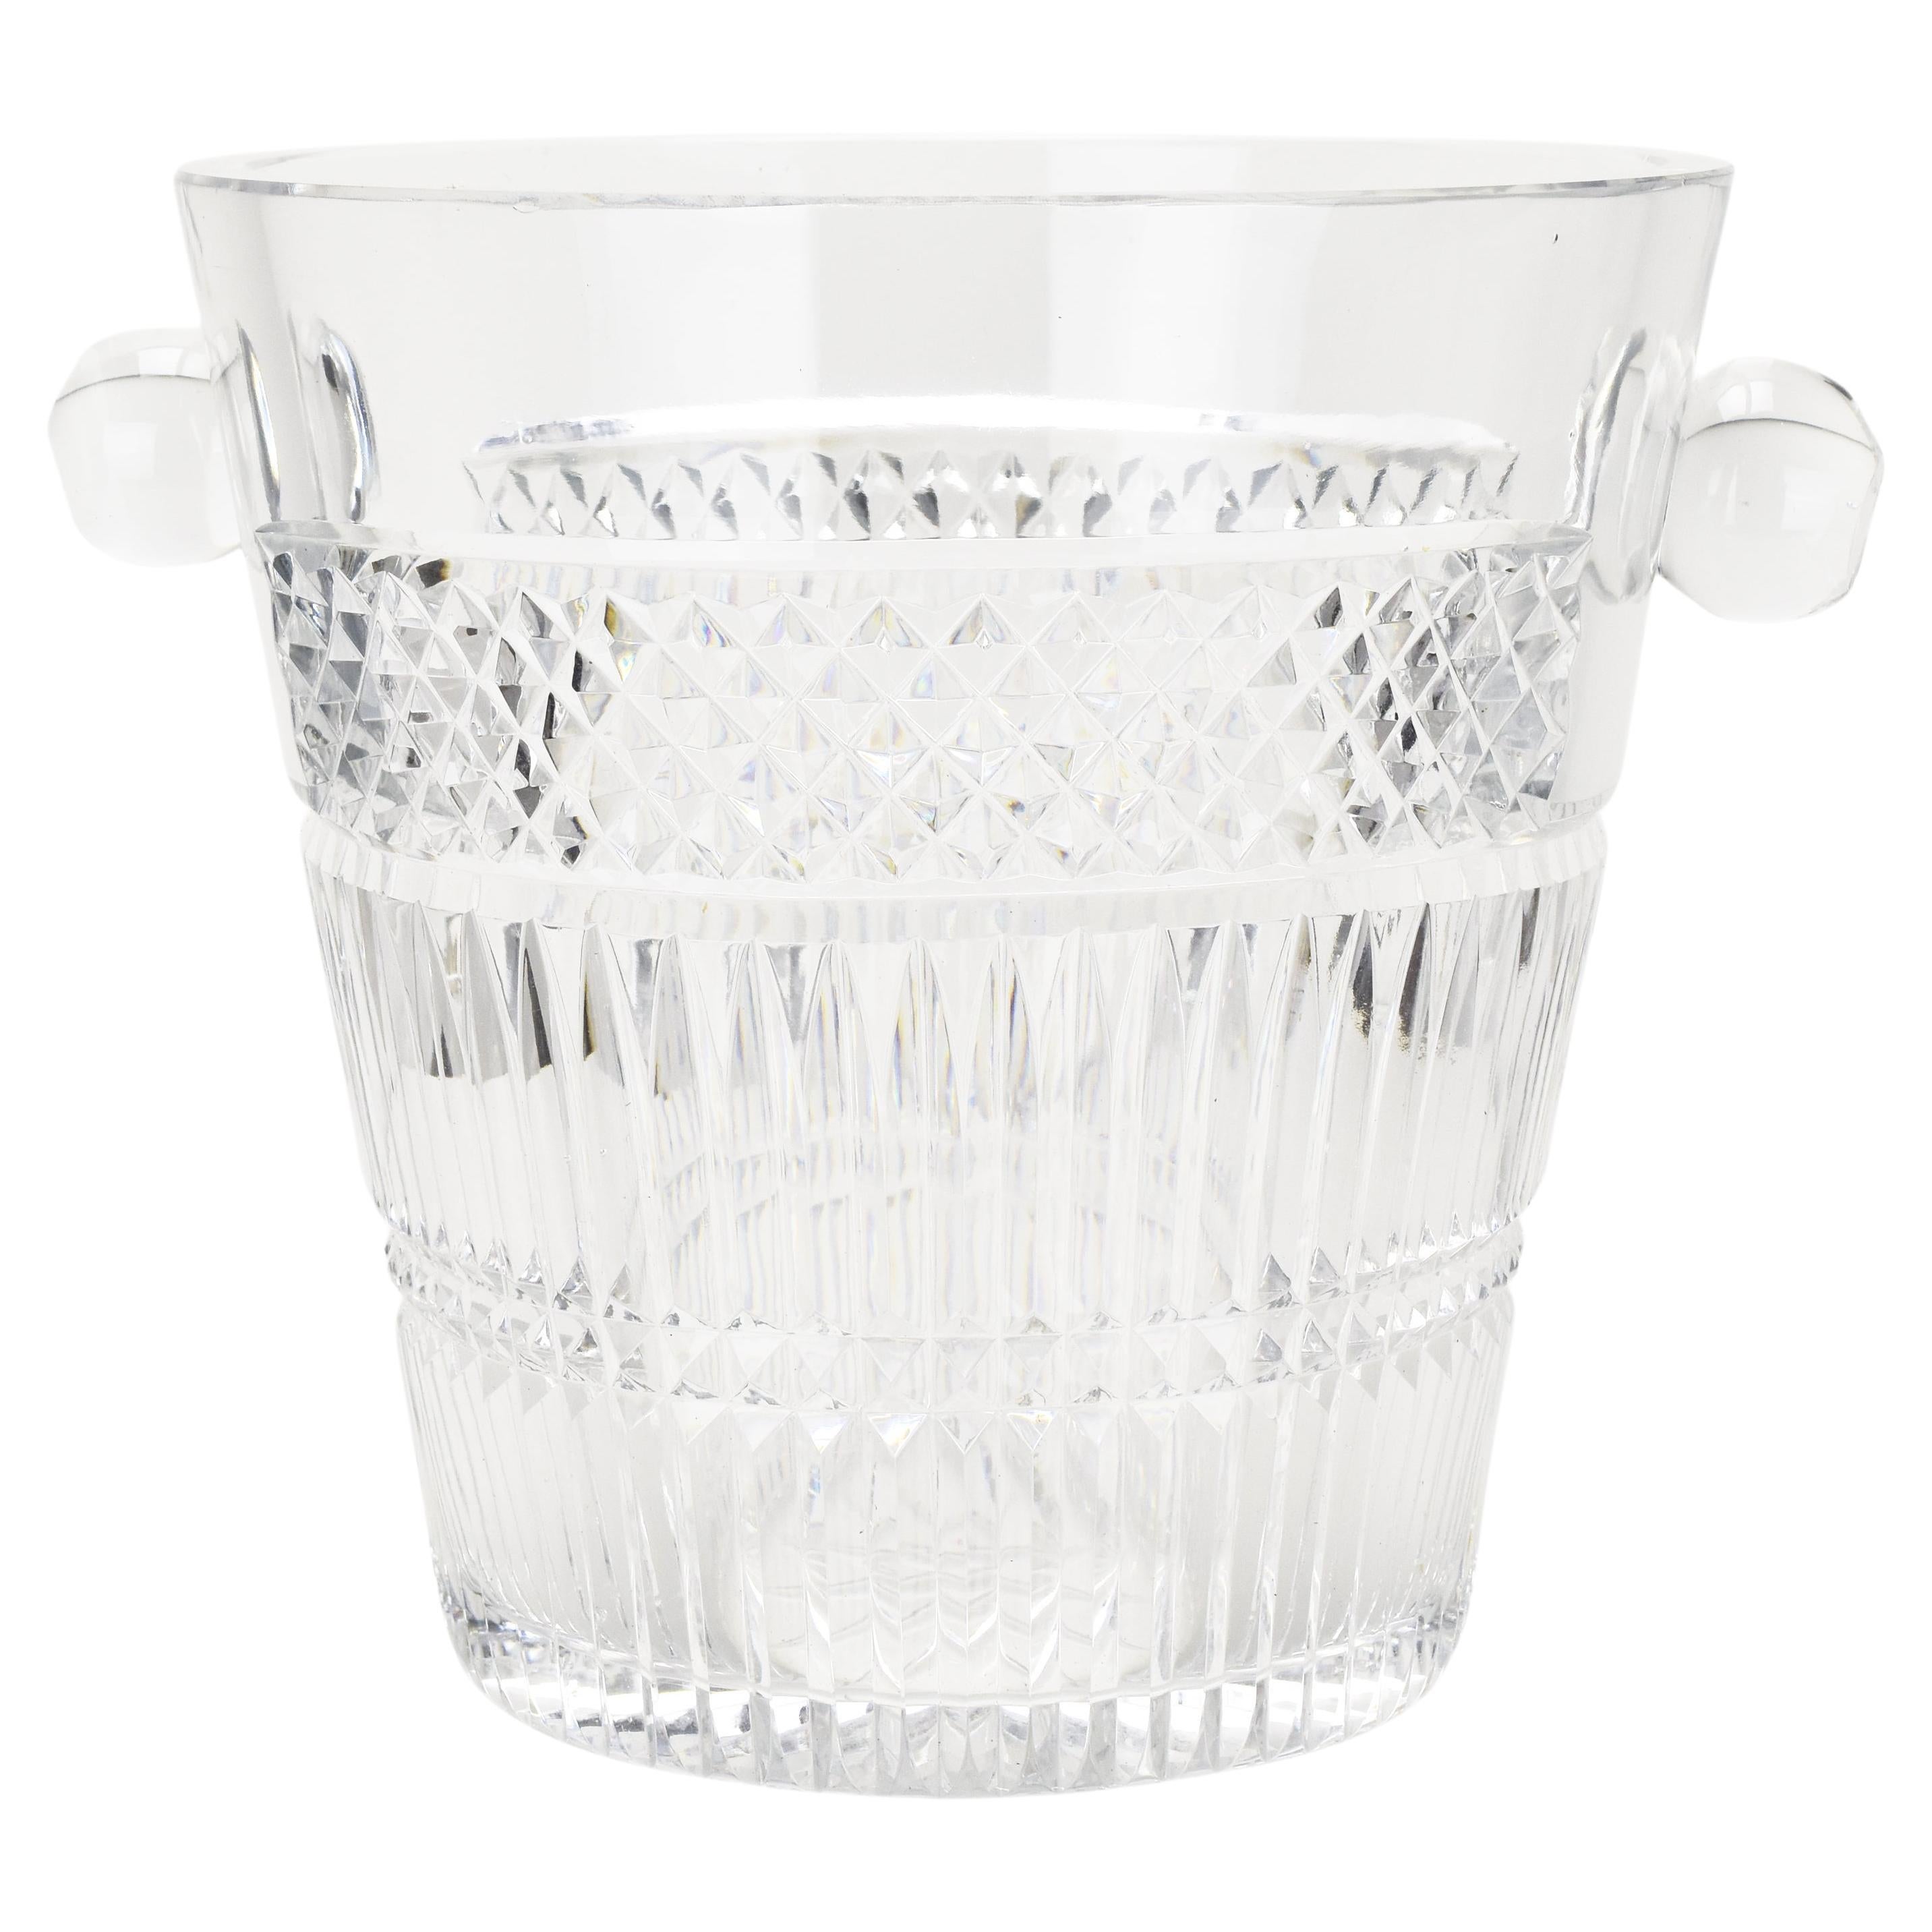 Massive French Art Deco Cut Crystal Glass Champaign Cooler Ice Bucket Baccarat